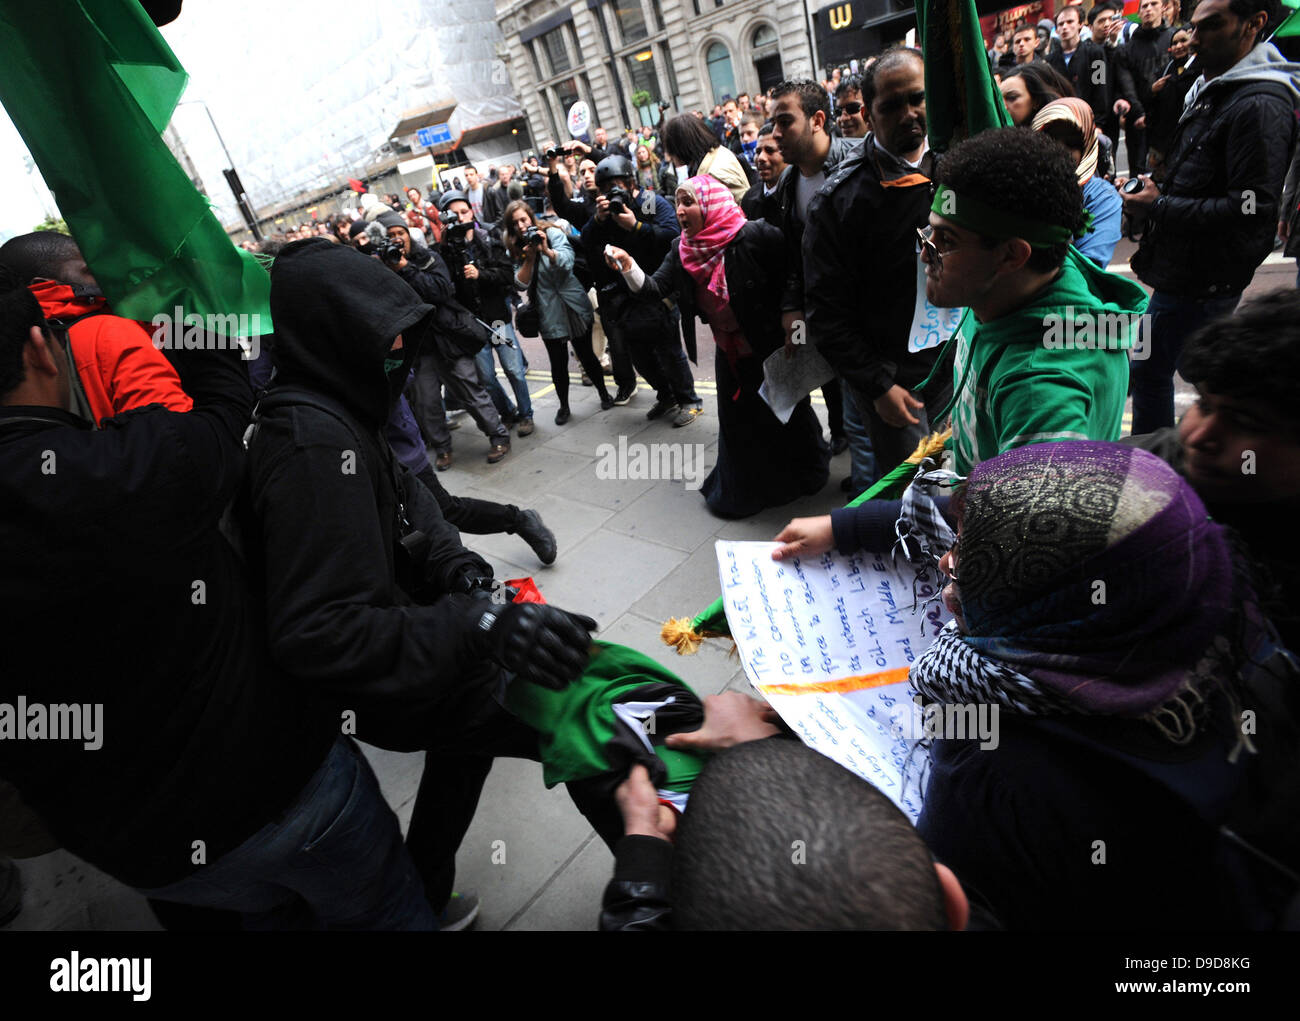 Libyan pro Gaddafi supporters violently attack a group of protesters carrying the flag of the Libyan rebels during the March for the Alternative - TUC demonstration in Central London. London, England - 26.03.11 Stock Photo